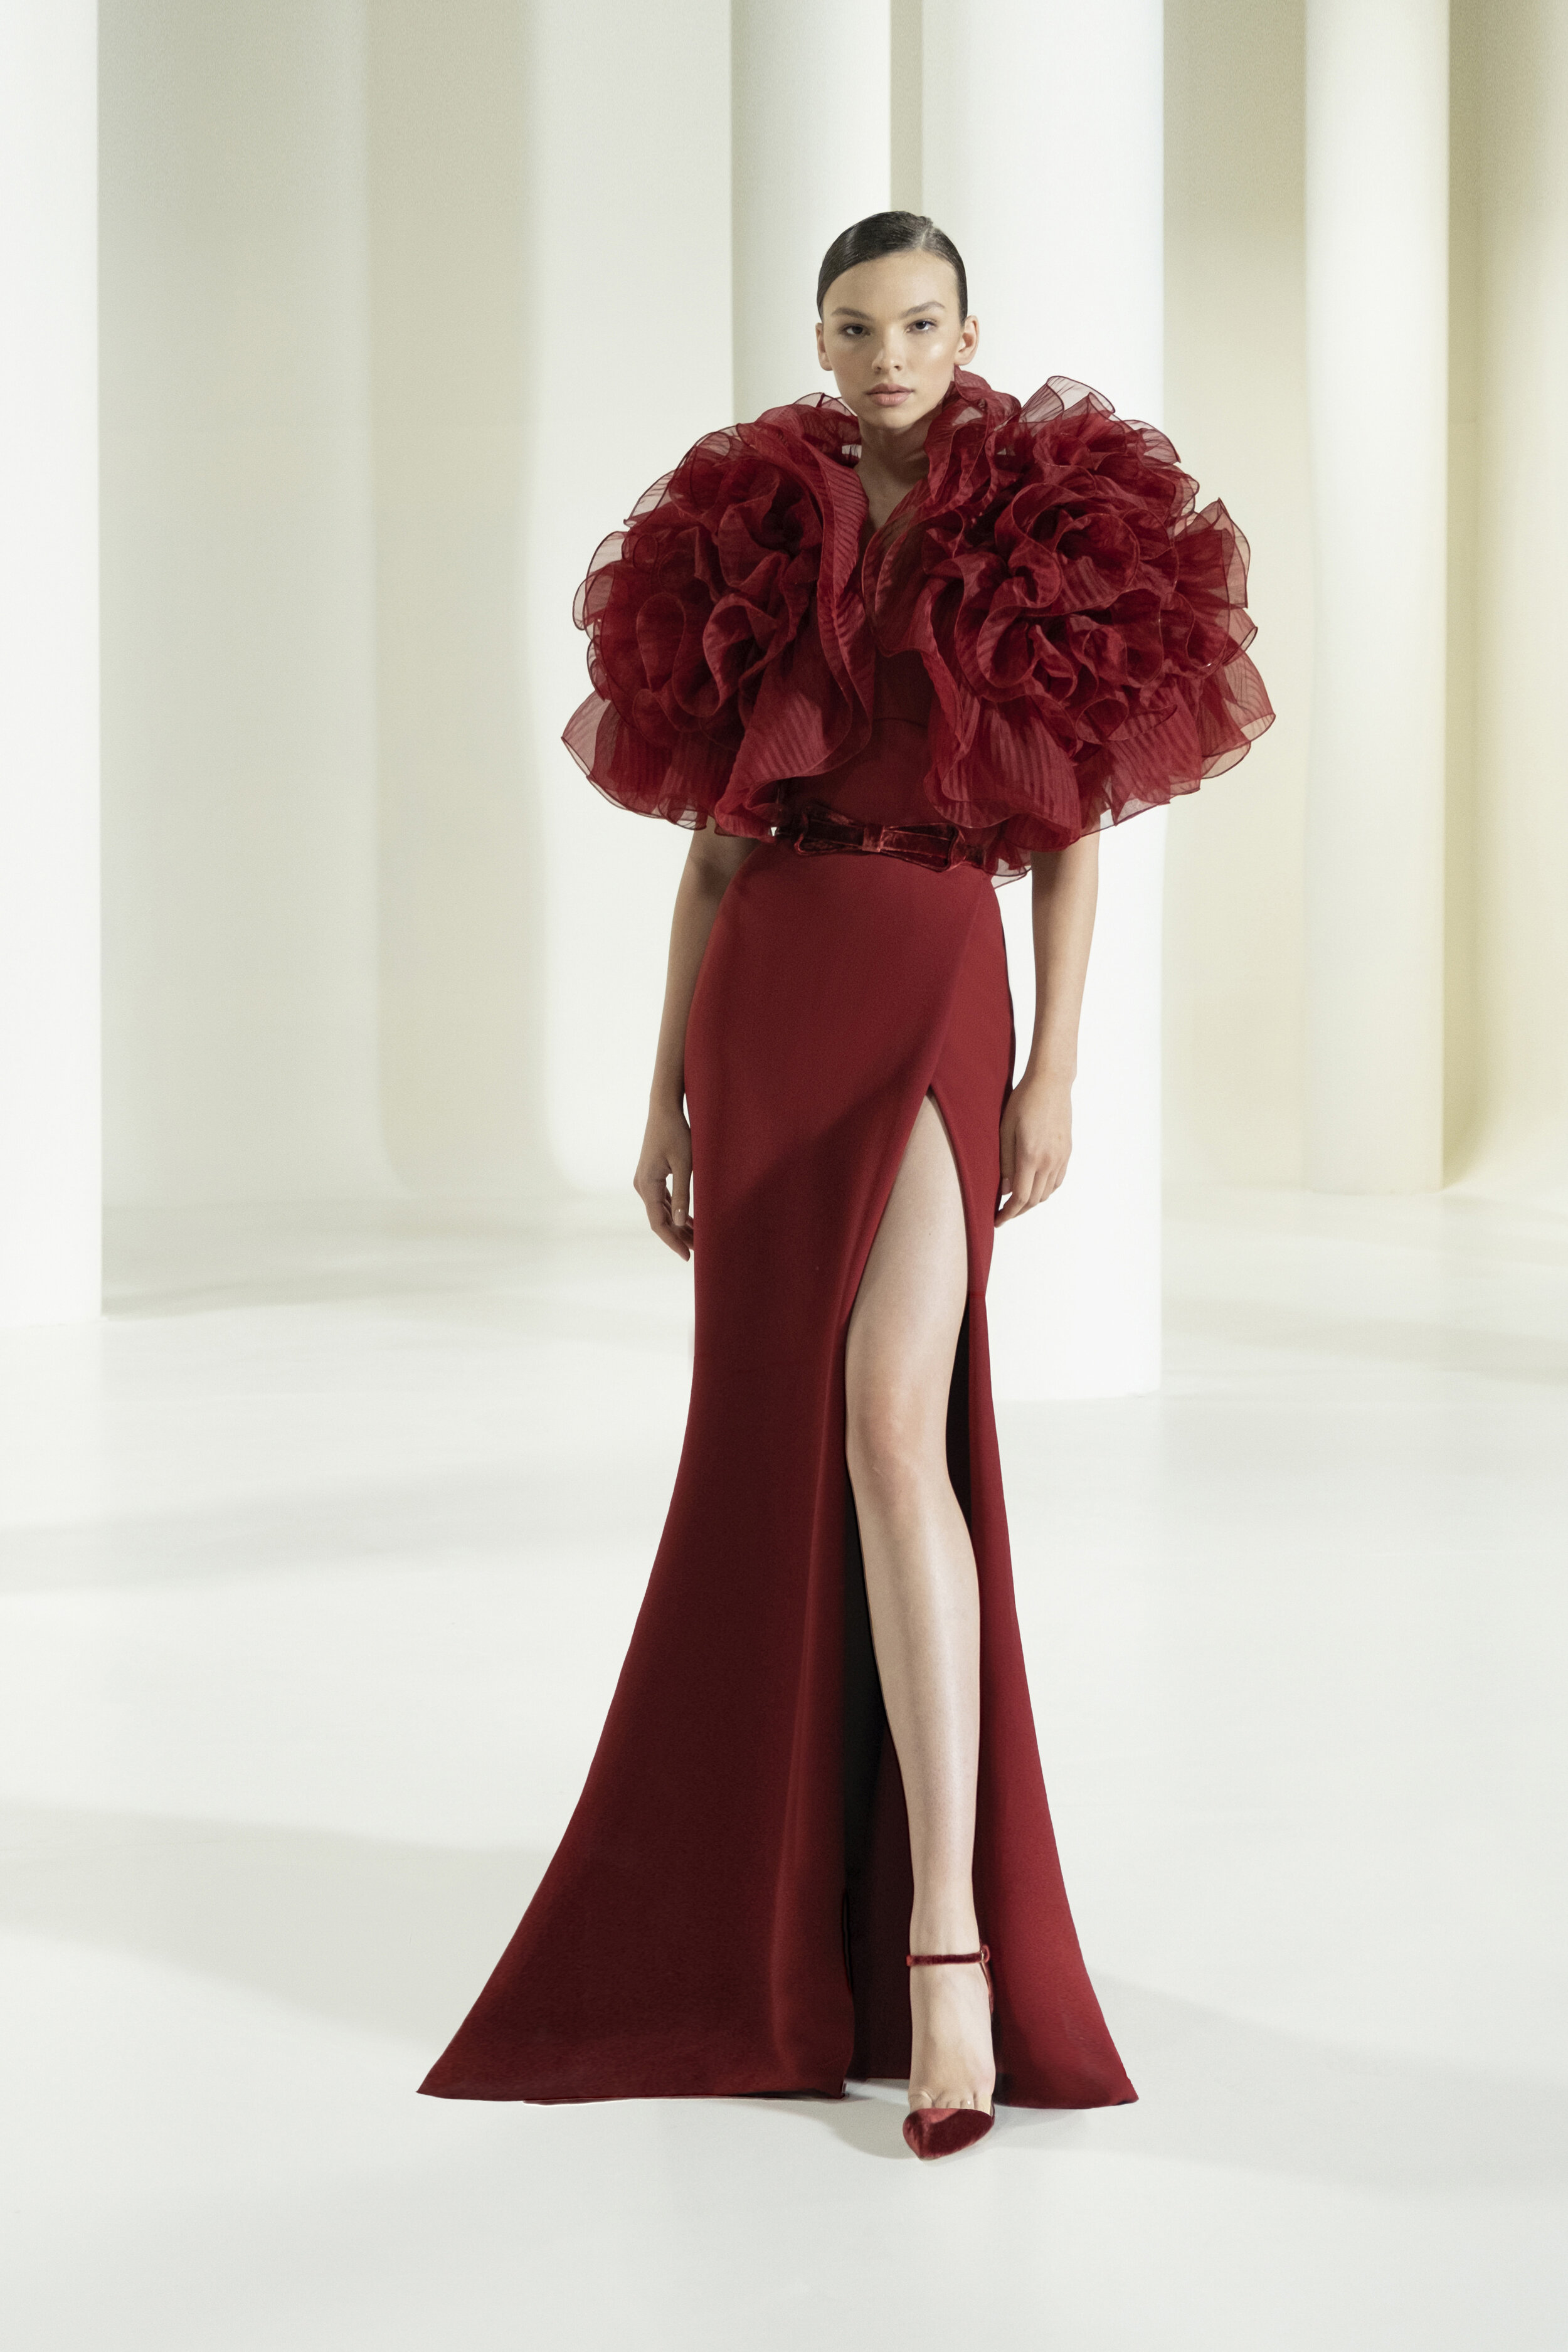 Fall 2021 Haute Couture: Elie Saab's Buds of Hope — CoutureNotebook